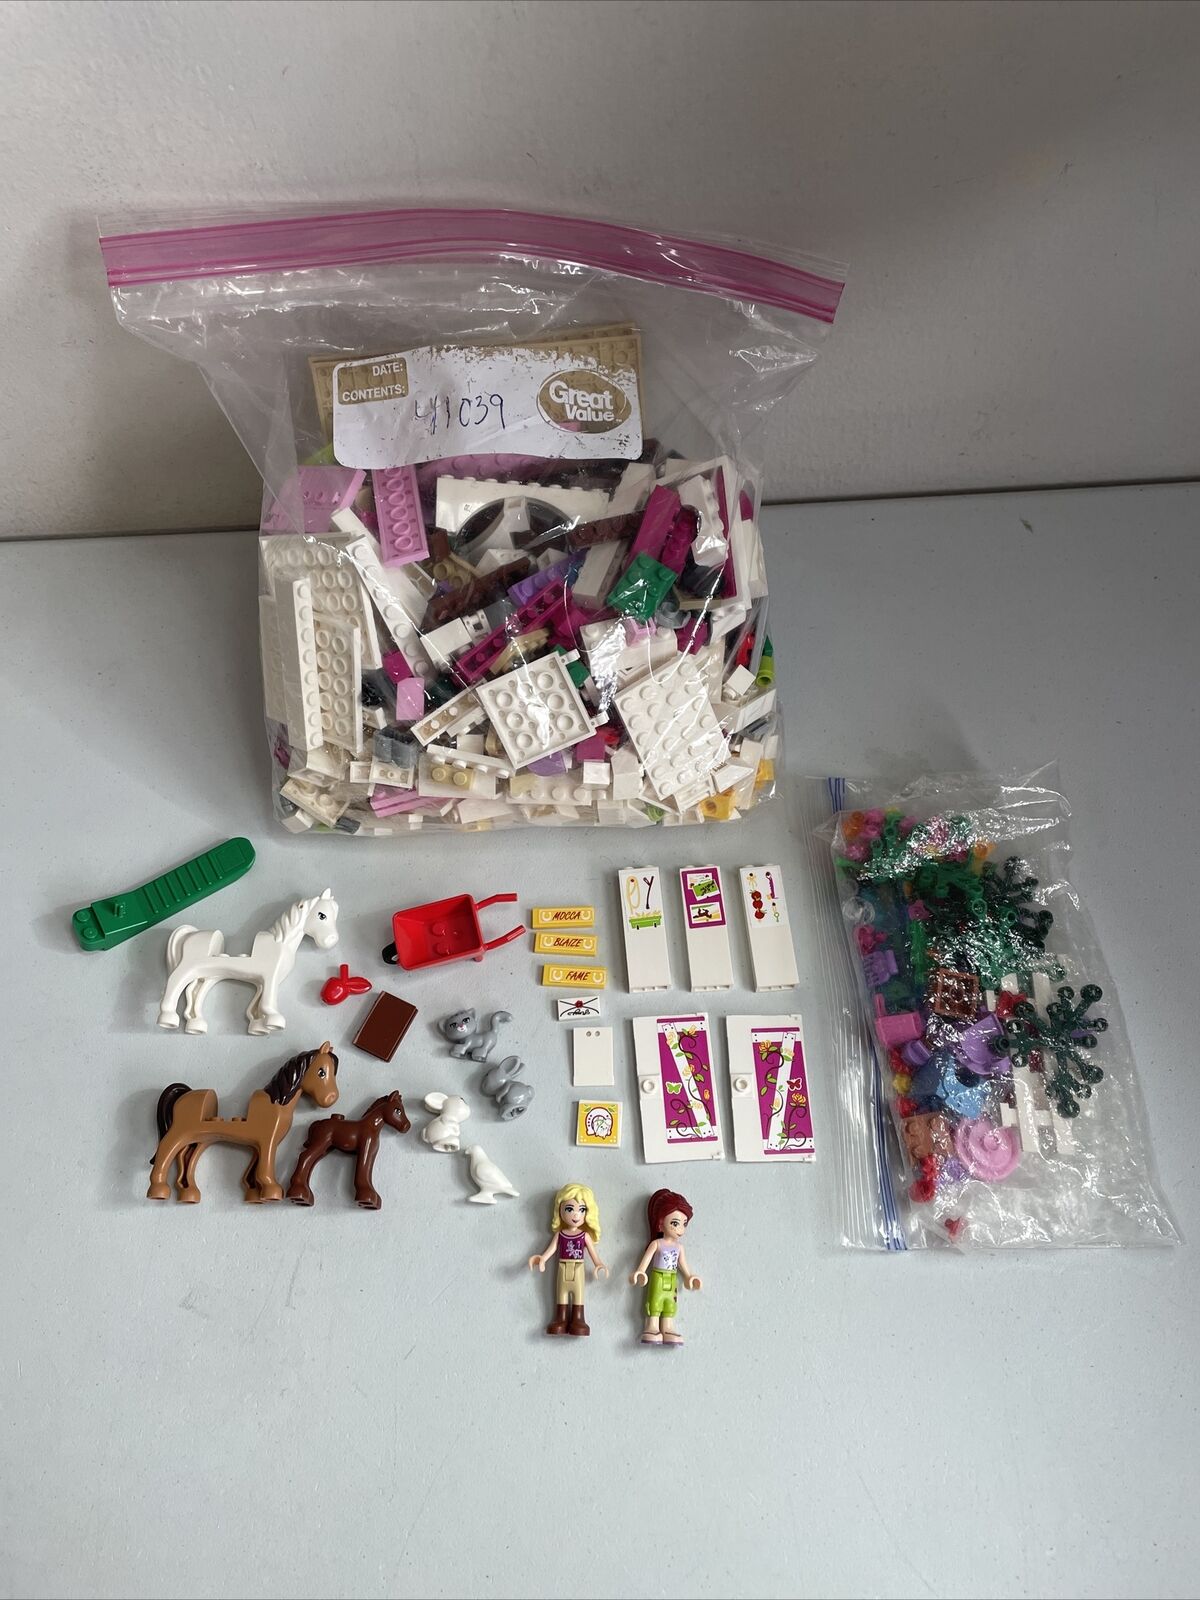 Lego Friends 41039 Sunshine Ranch w/ 2 Minifigures **Incomplete - Read**